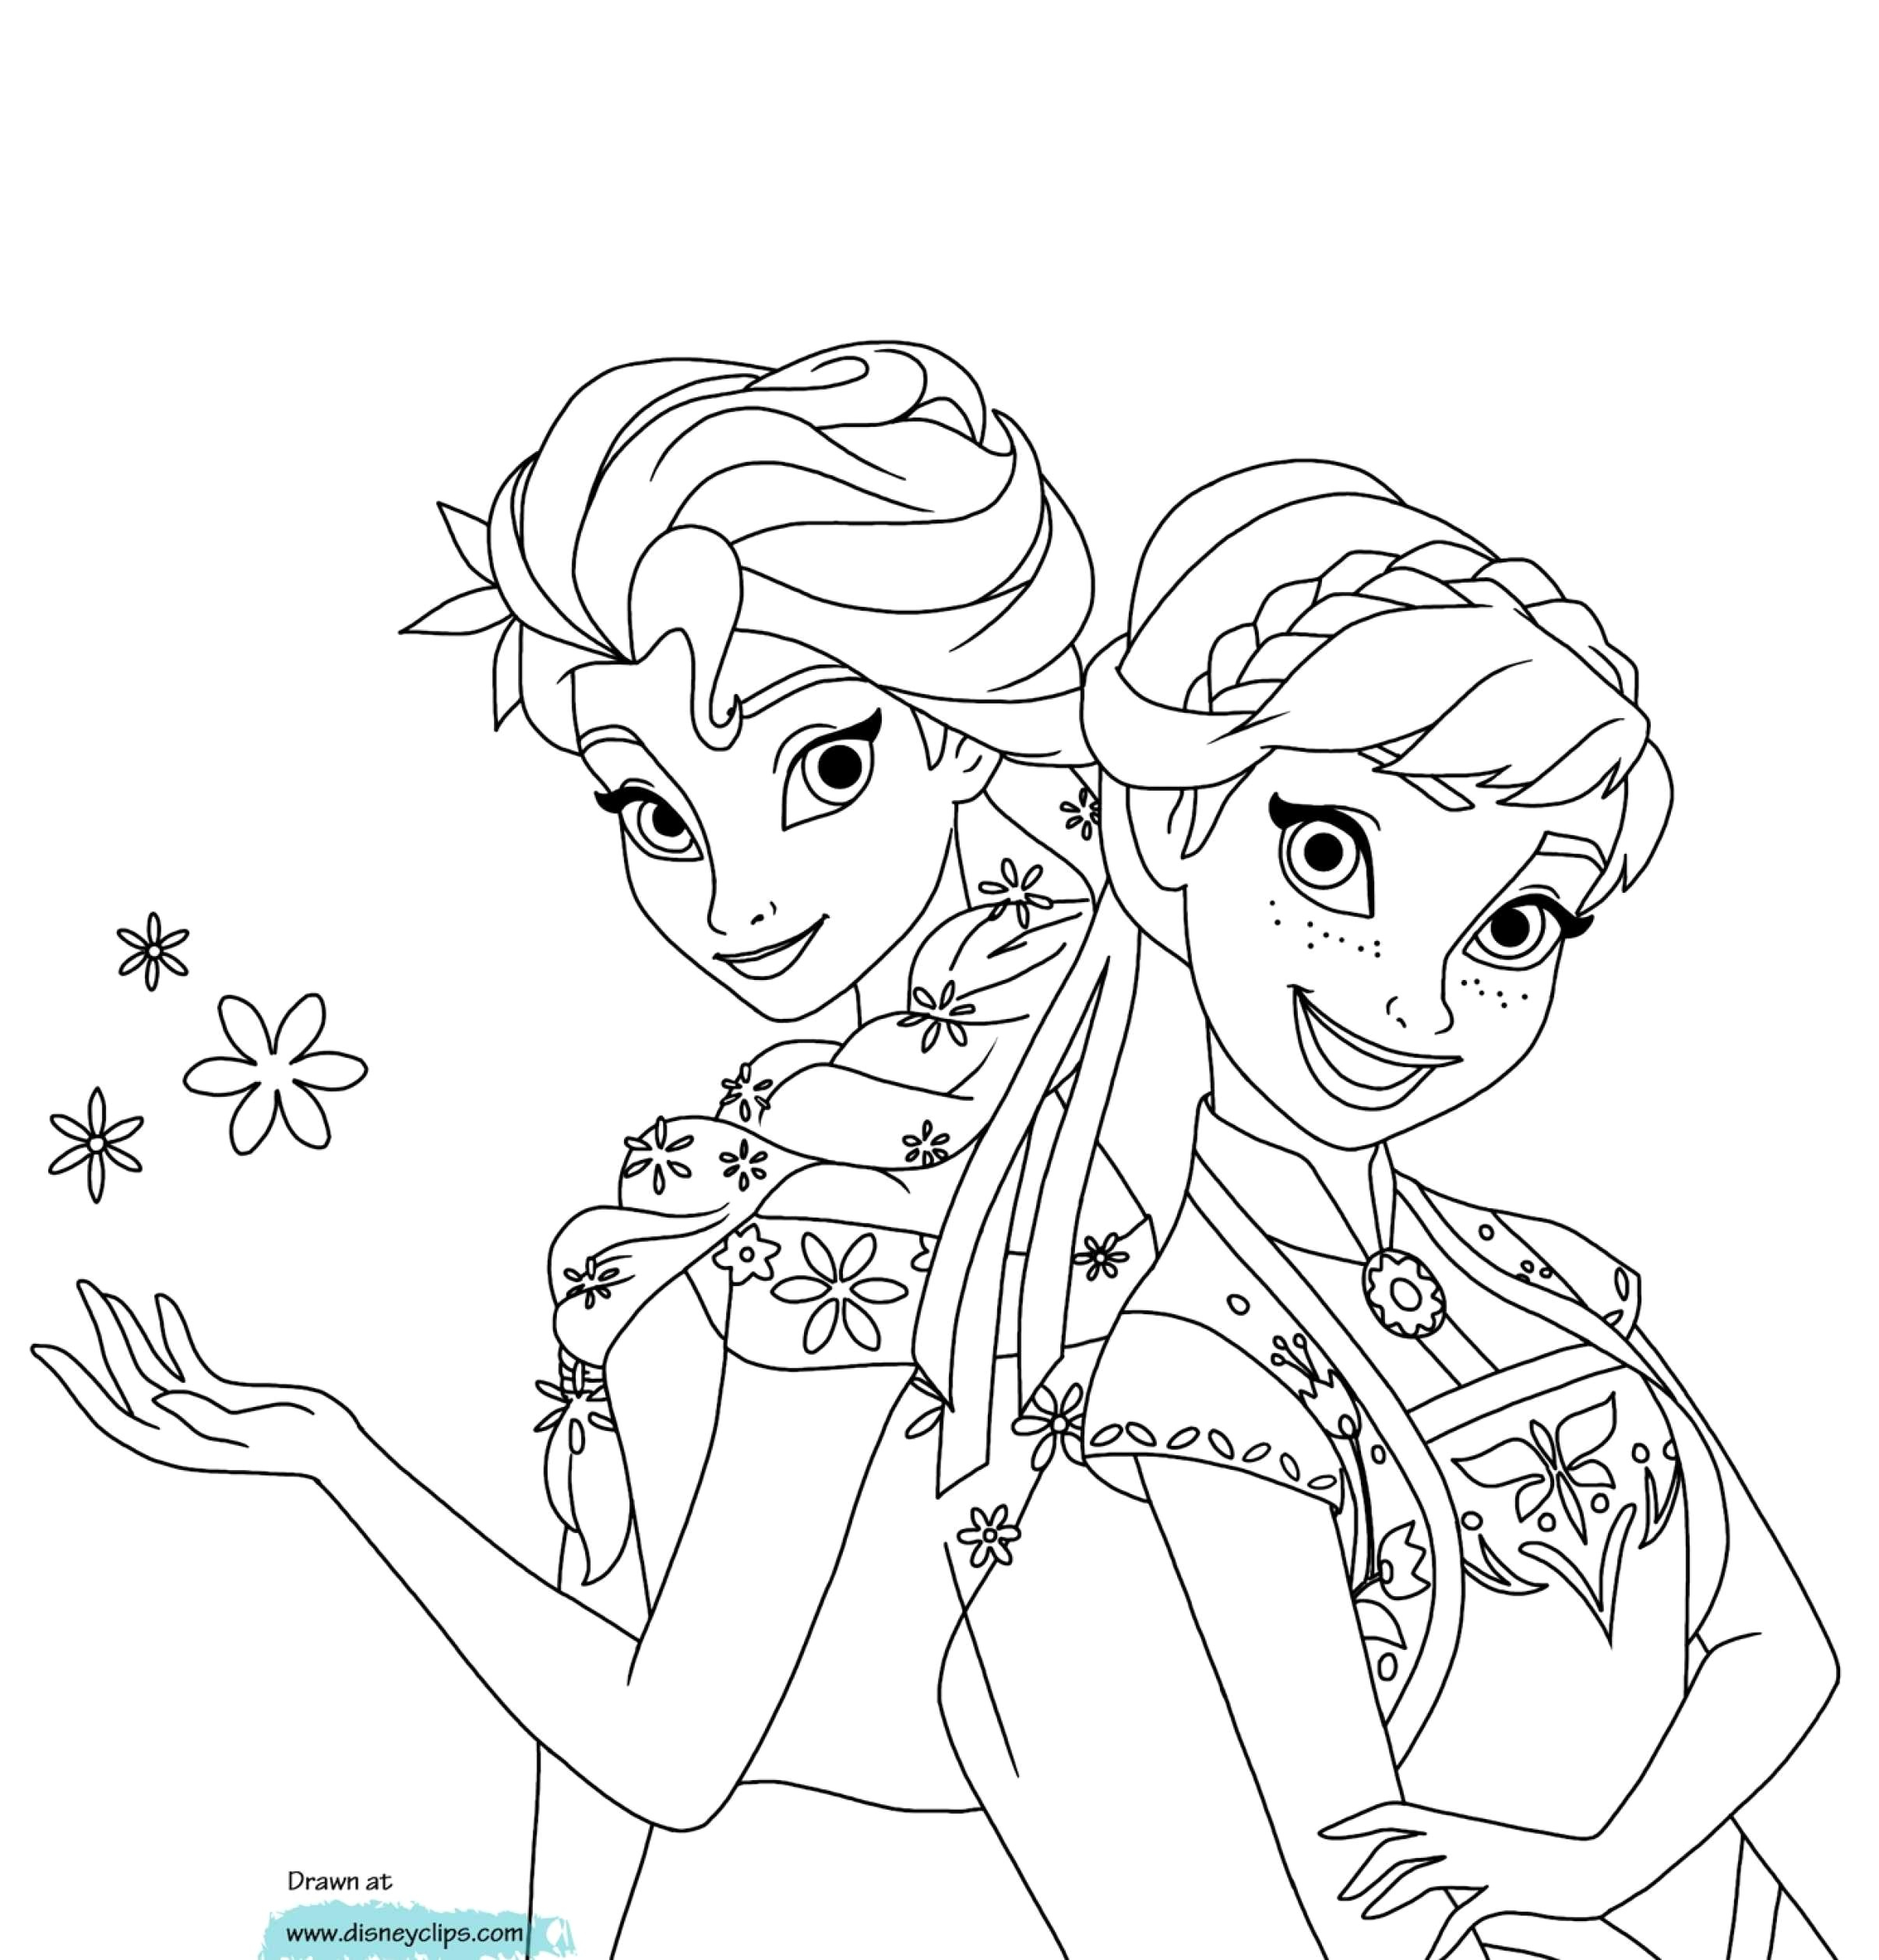 Coloring Pages For Girls Frozen Coloring Book Ideas 49 Staggering Frozen Coloring Pages Coloring